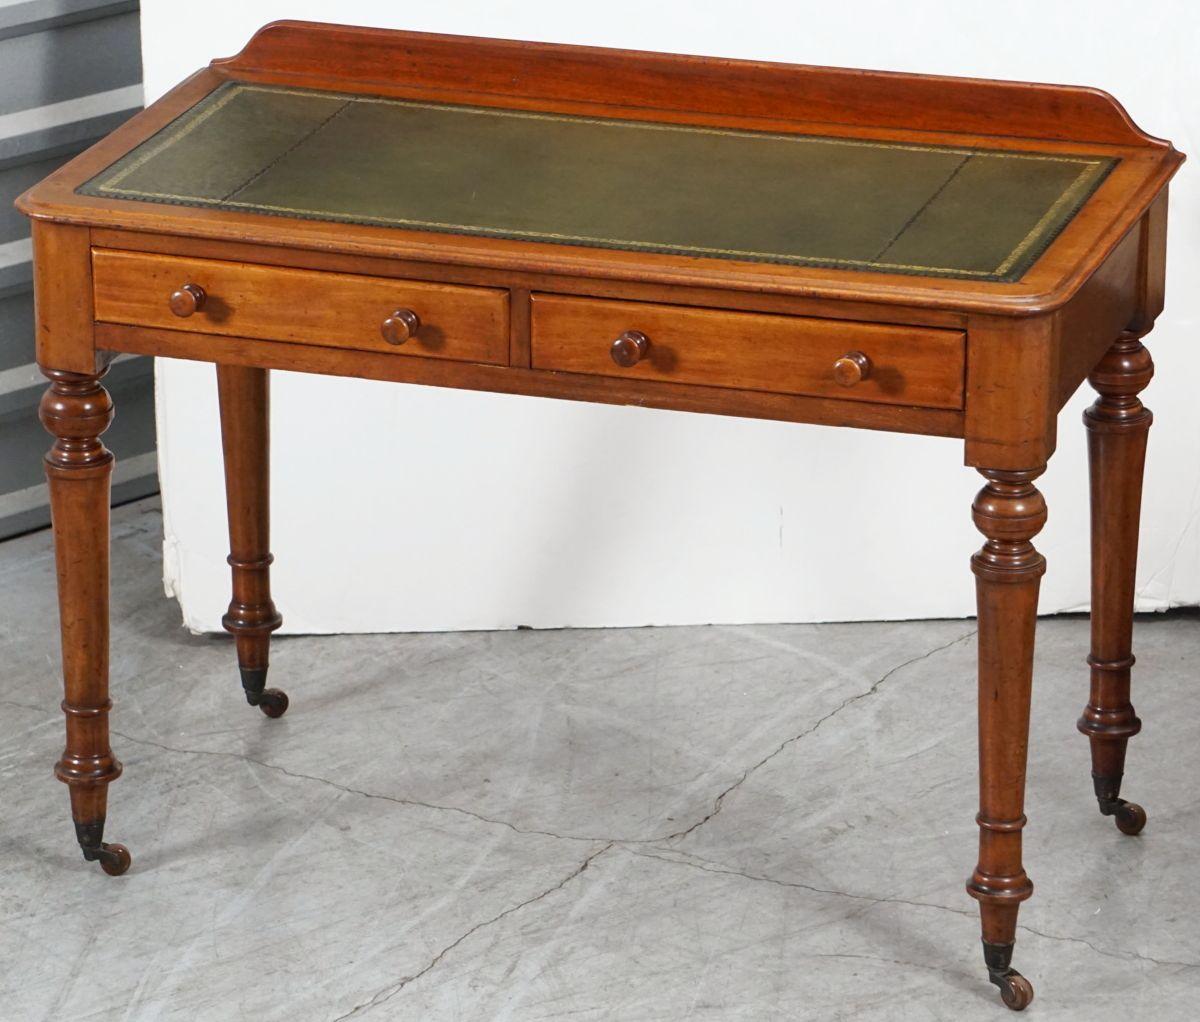 A handsome English writing table or desk of mahogany from the 19th century, featuring a leather top embossed with gilt edge, with shaped gallery back, over a frieze of two fitted drawers - each with two turned knob pulls, and resting on turned legs